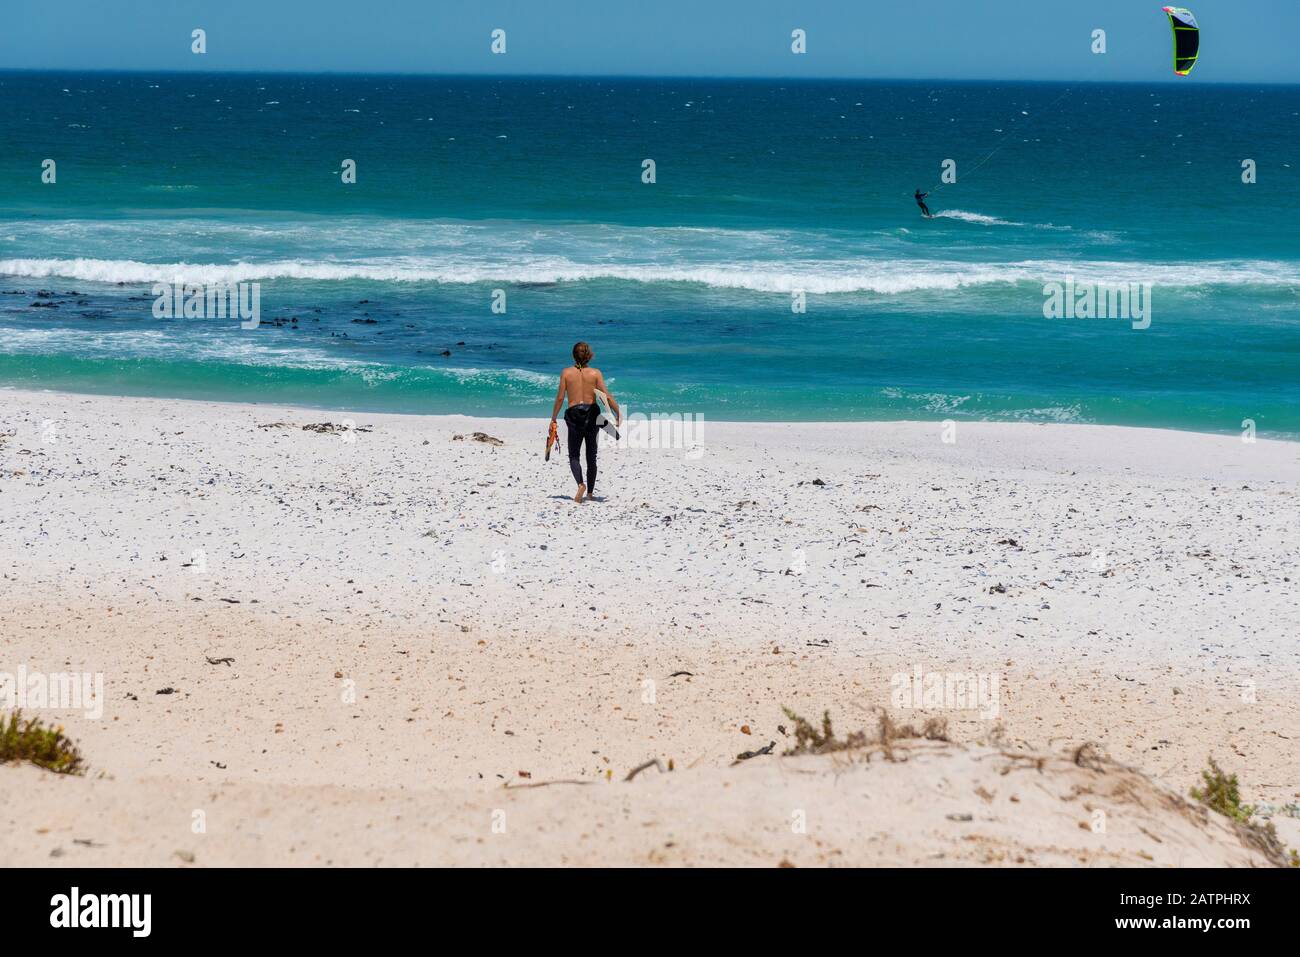 Surfer walks down sand at the famous, windy, kite surfing beach at Haakgat Point, Otto due Plessis Drive, Melkbosstrand,Capte Town, South Africa Stock Photo